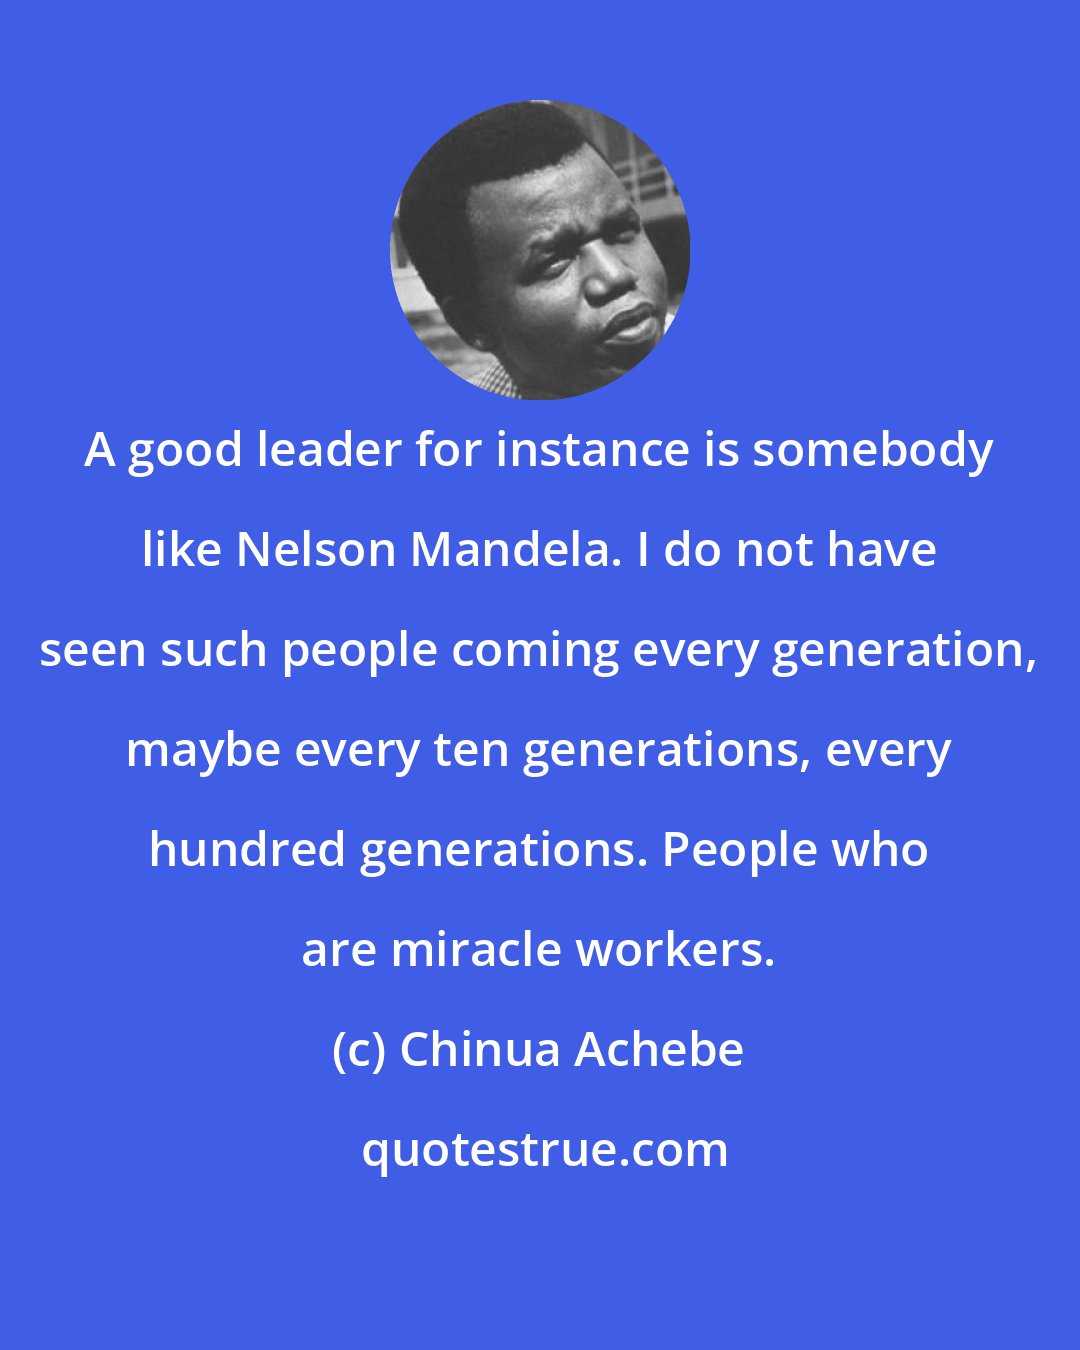 Chinua Achebe: A good leader for instance is somebody like Nelson Mandela. I do not have seen such people coming every generation, maybe every ten generations, every hundred generations. People who are miracle workers.